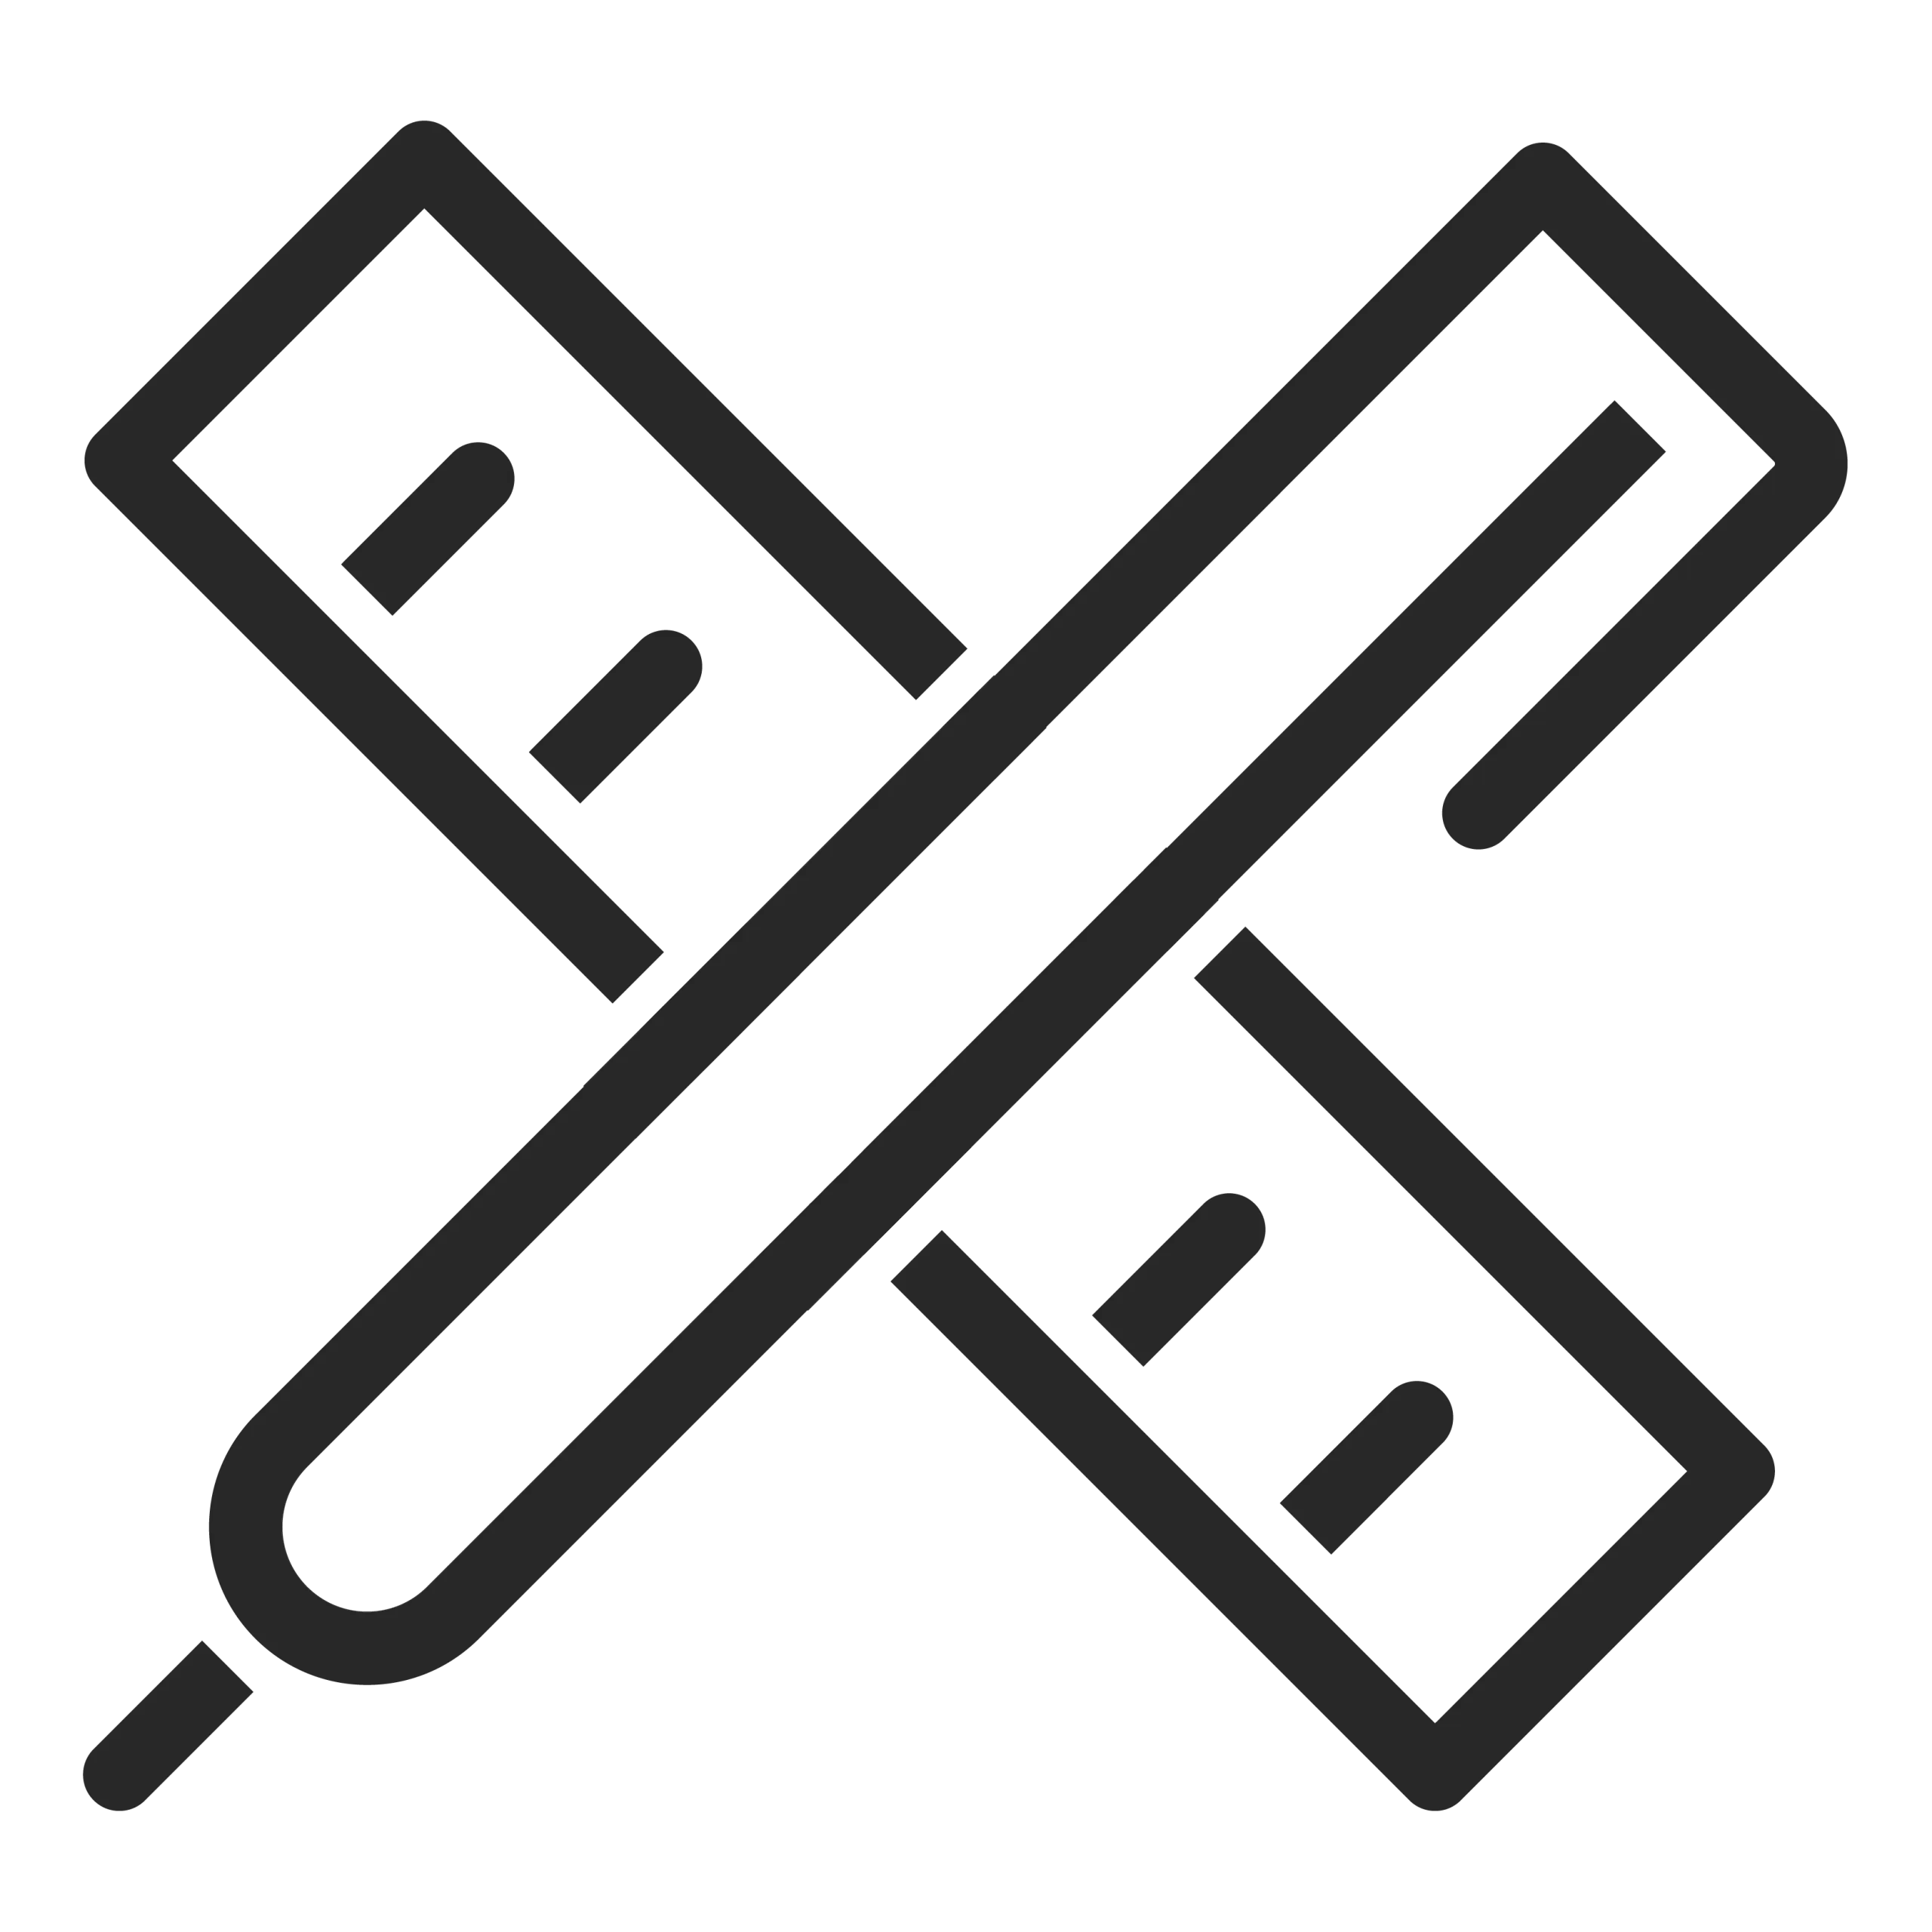 Icon of crossed pencil and ruler, representing tools commonly used for drawing or measuring, often vital in home remodeling projects.